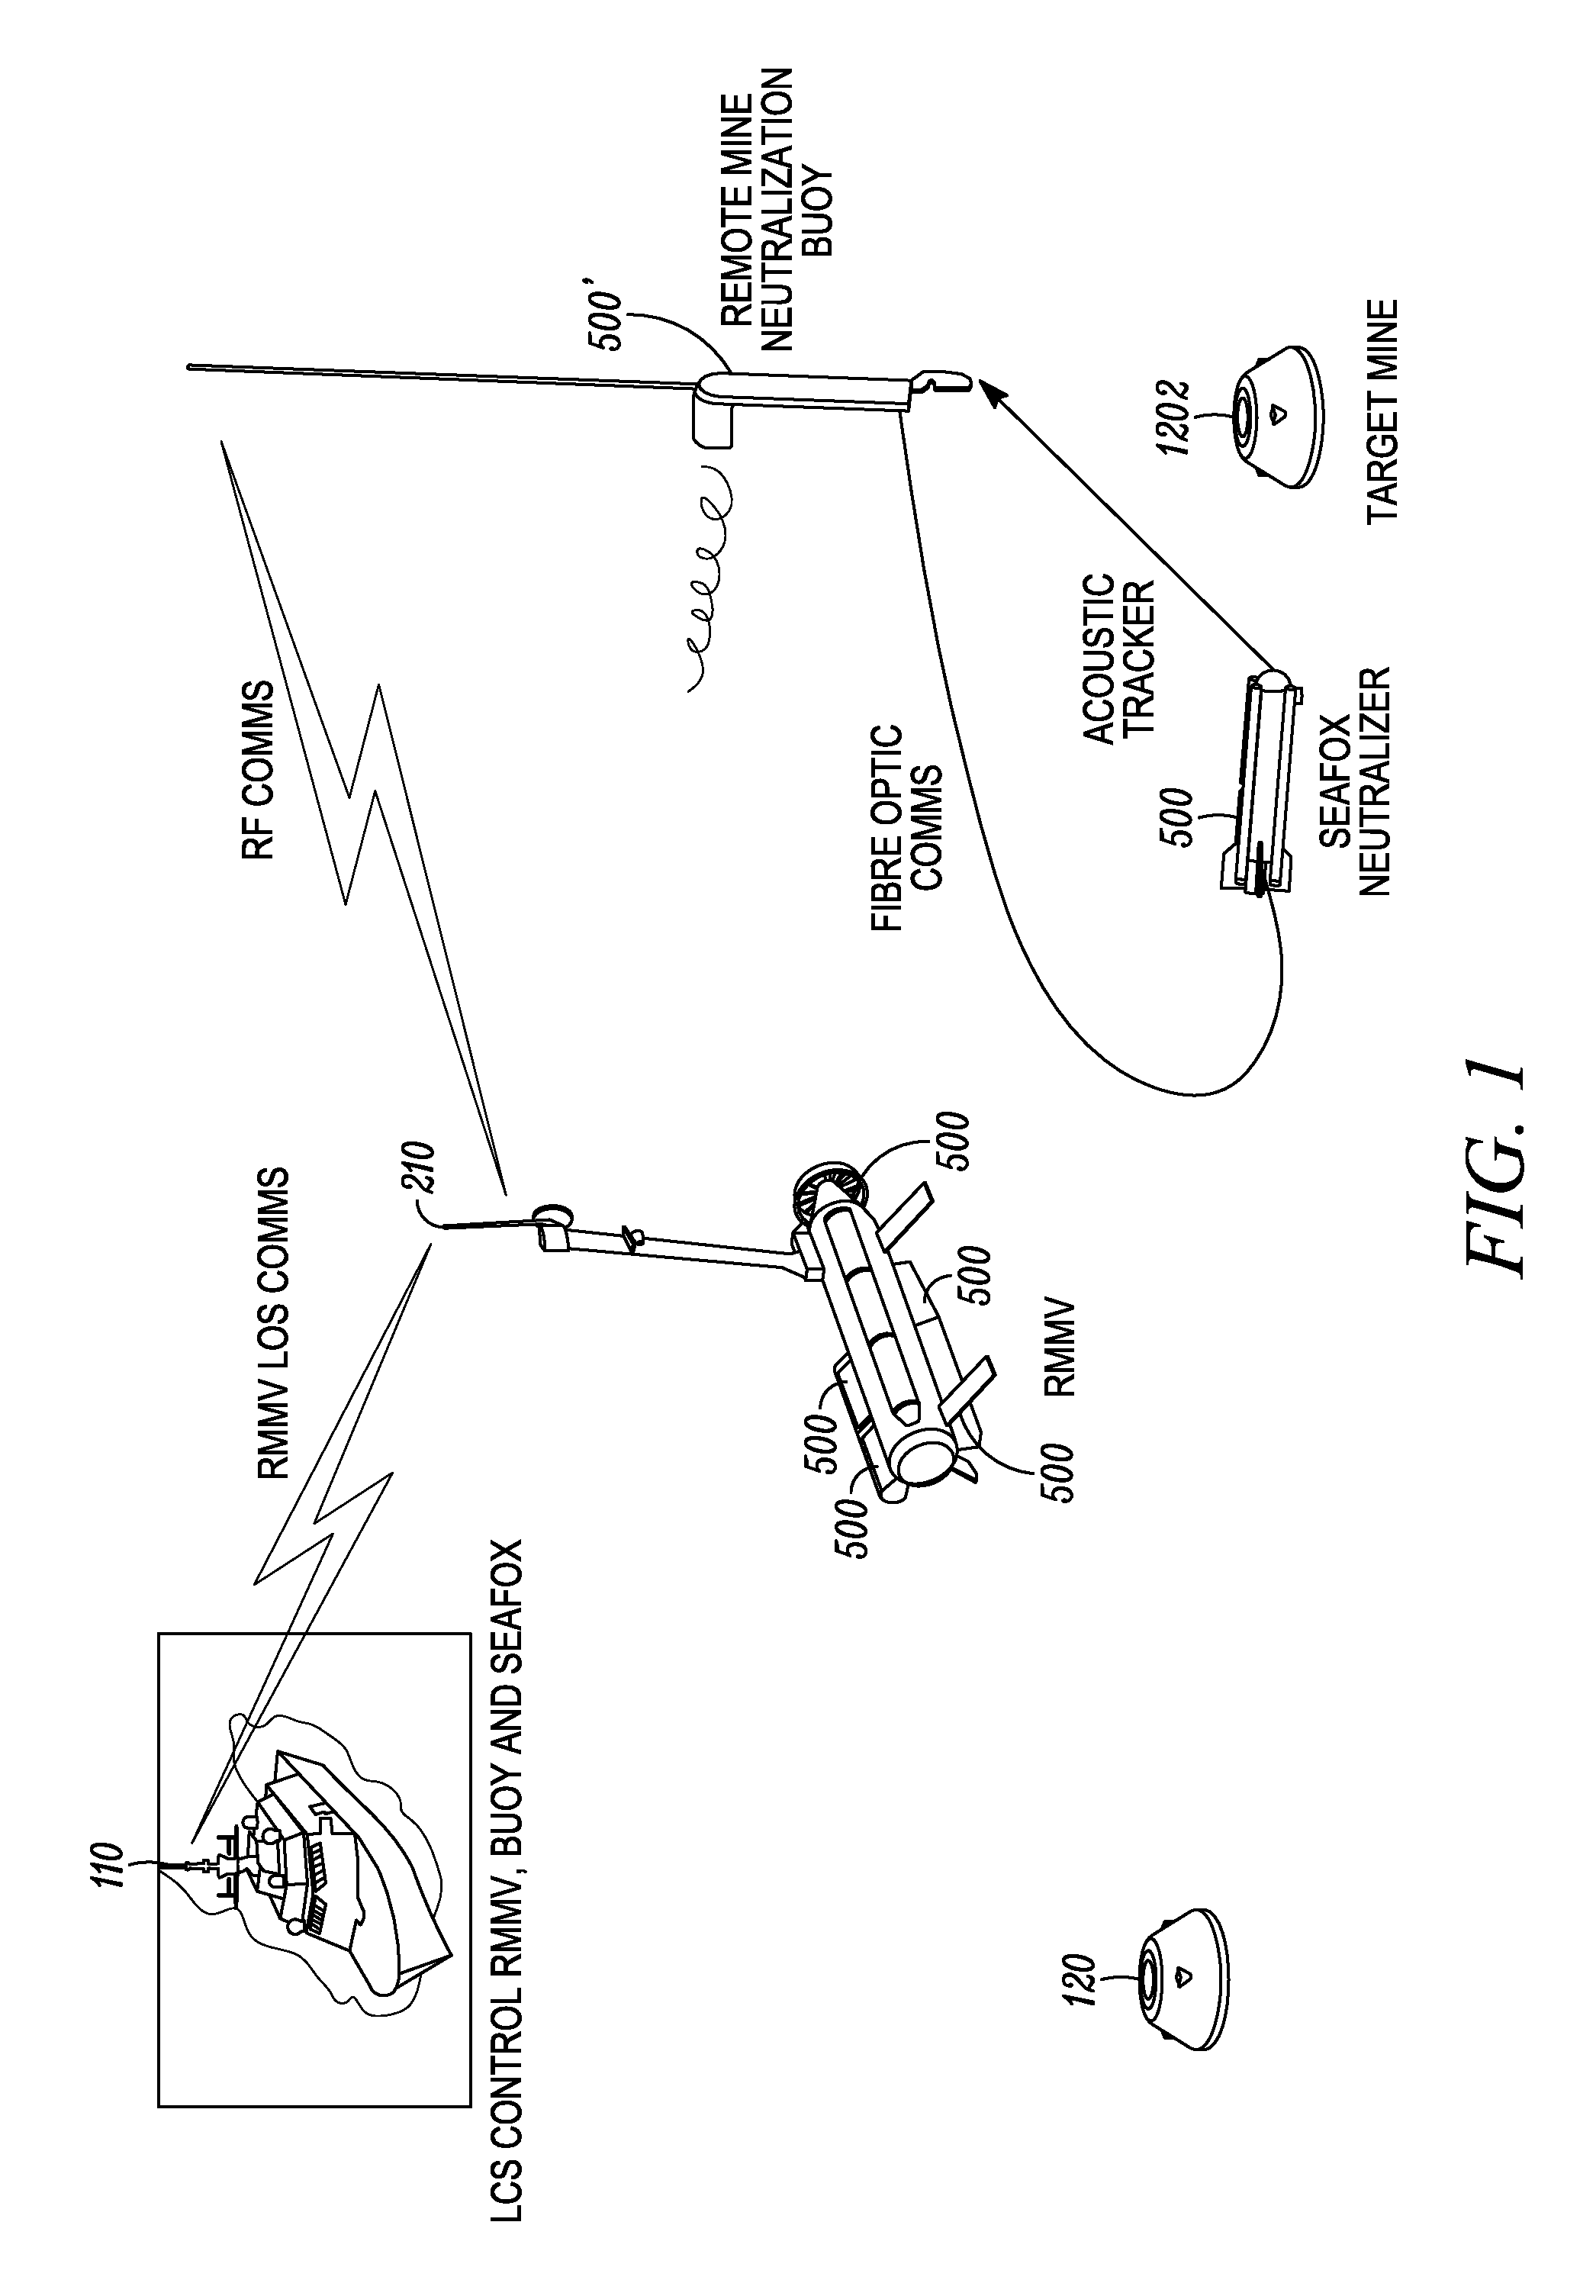 Apparatus and method for neutralizing underwater mines